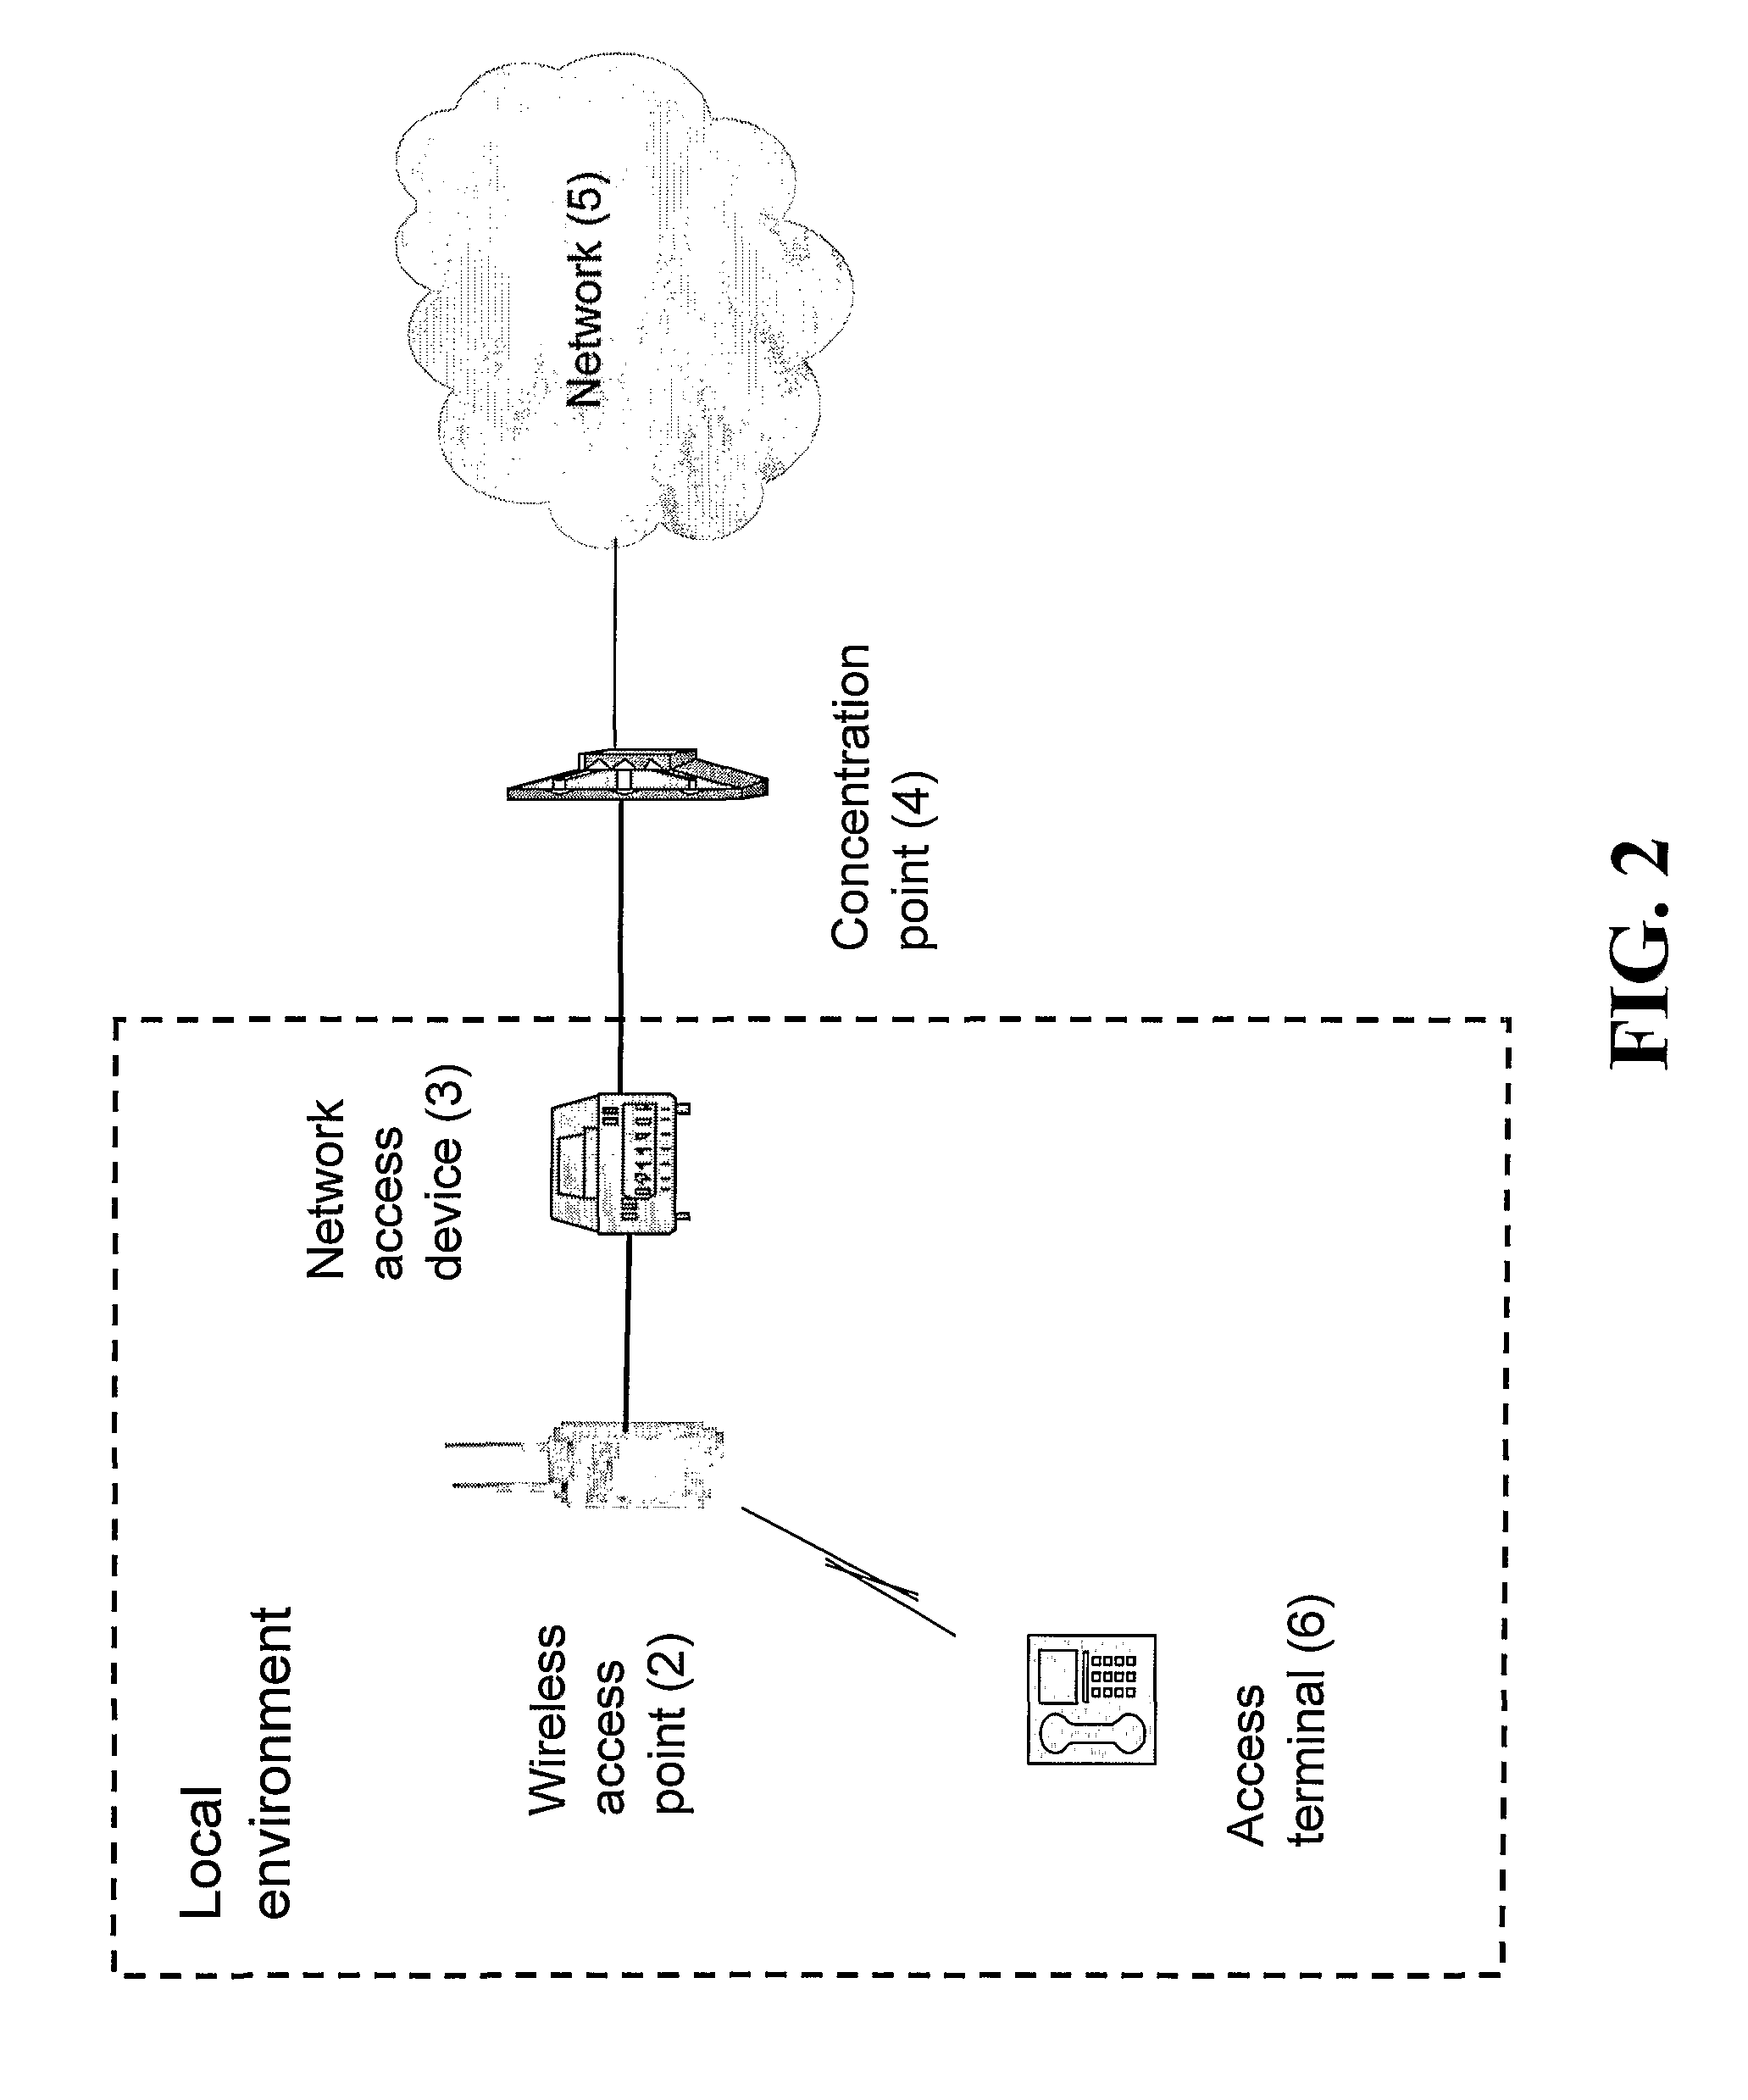 Concept for enabling access to a network using local wireless network